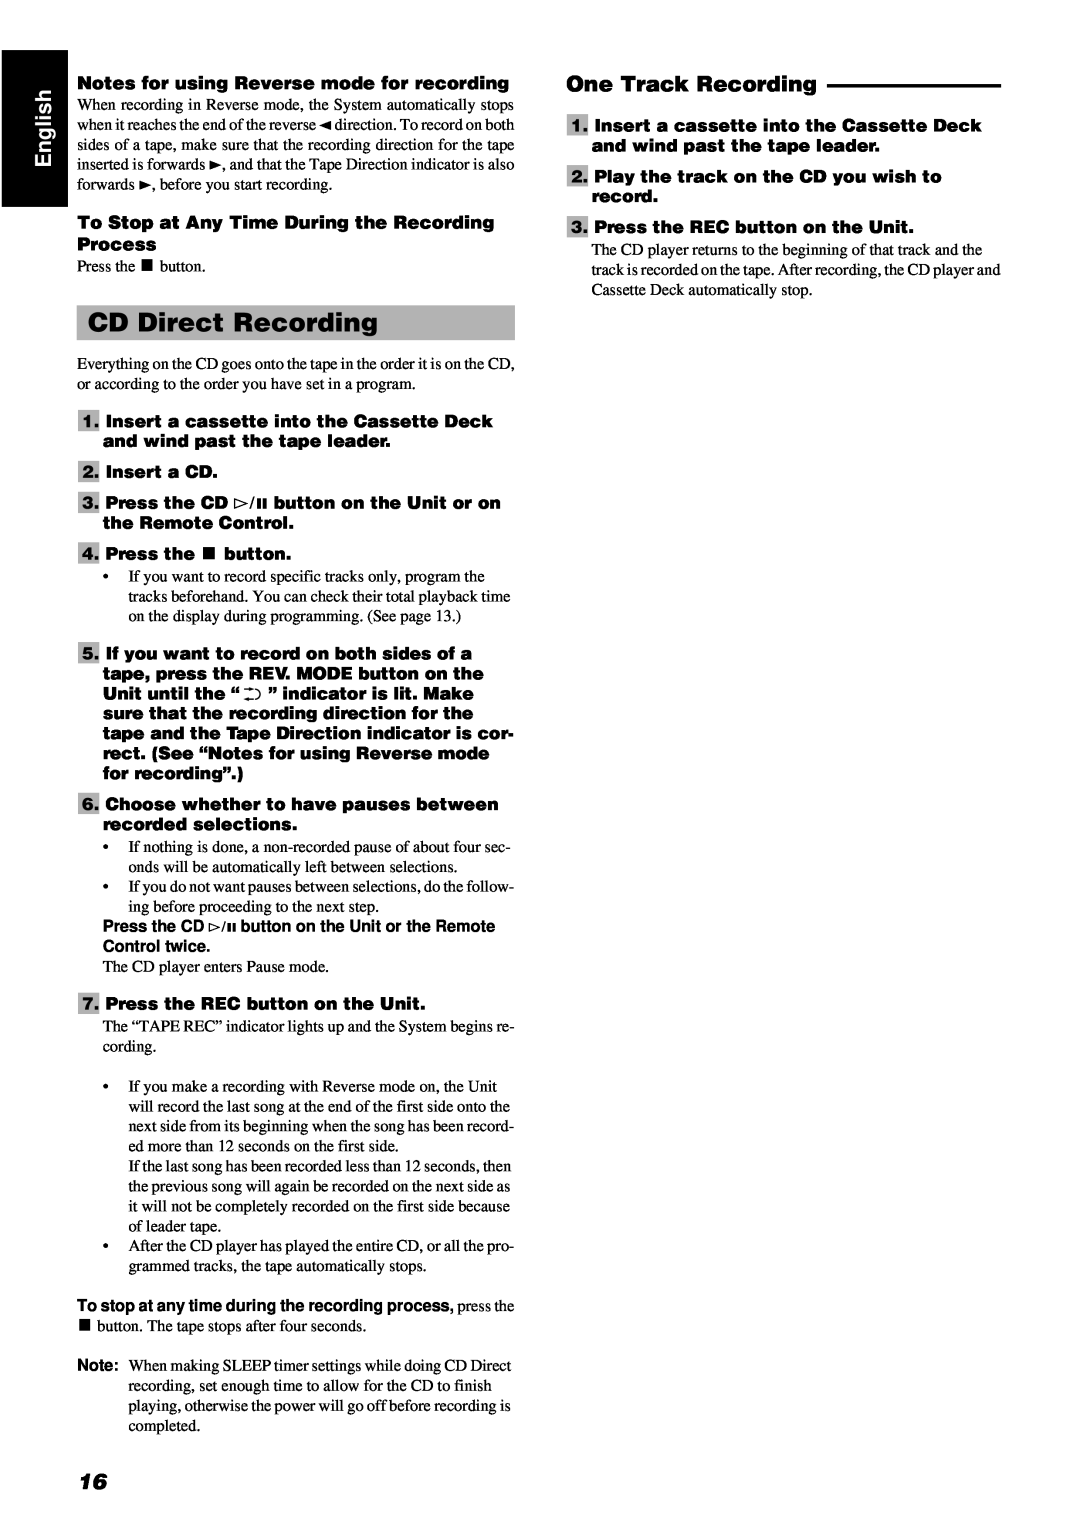 JVC UX-V5R CD Direct Recording, One Track Recording, Notes for using Reverse mode for recording, Insert a CD, English 